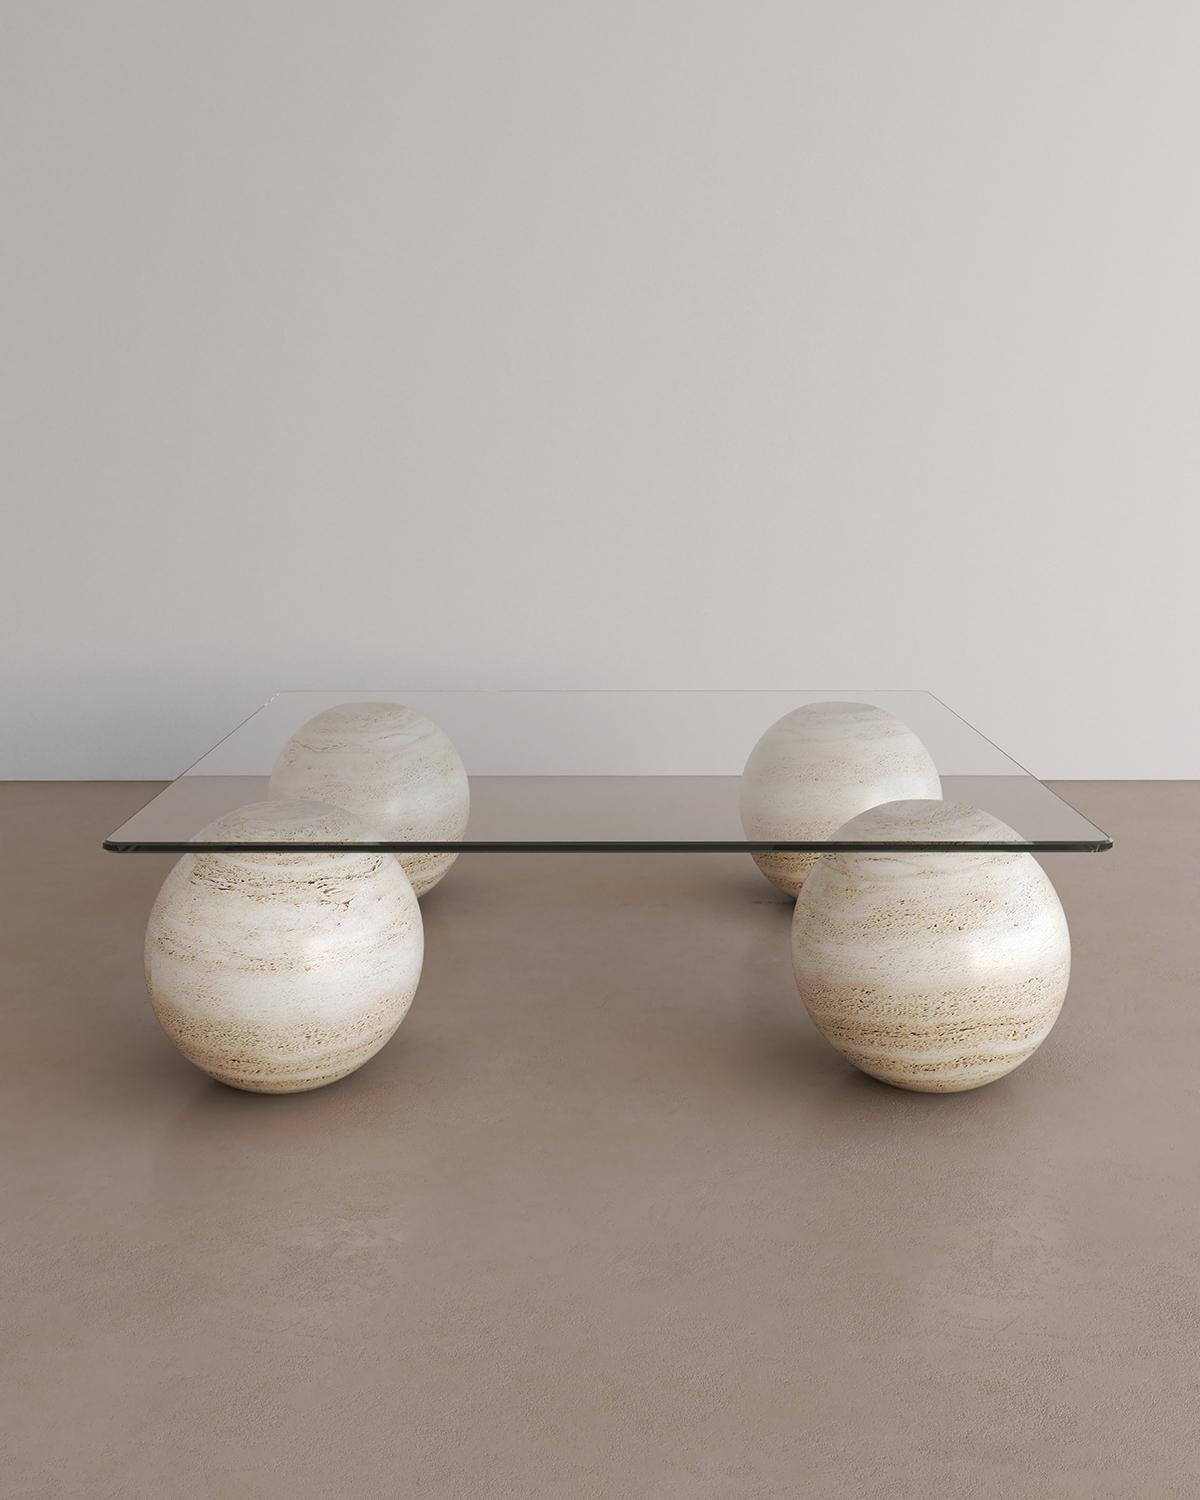 The Sufi Coffee Table II by The Essentialist celebrates proportion, scale and ancestral power. Filling the room with metaphors of ocean and fragments of sun. This monolithic coffee table embodies the three pillars of the earth intricately bound by